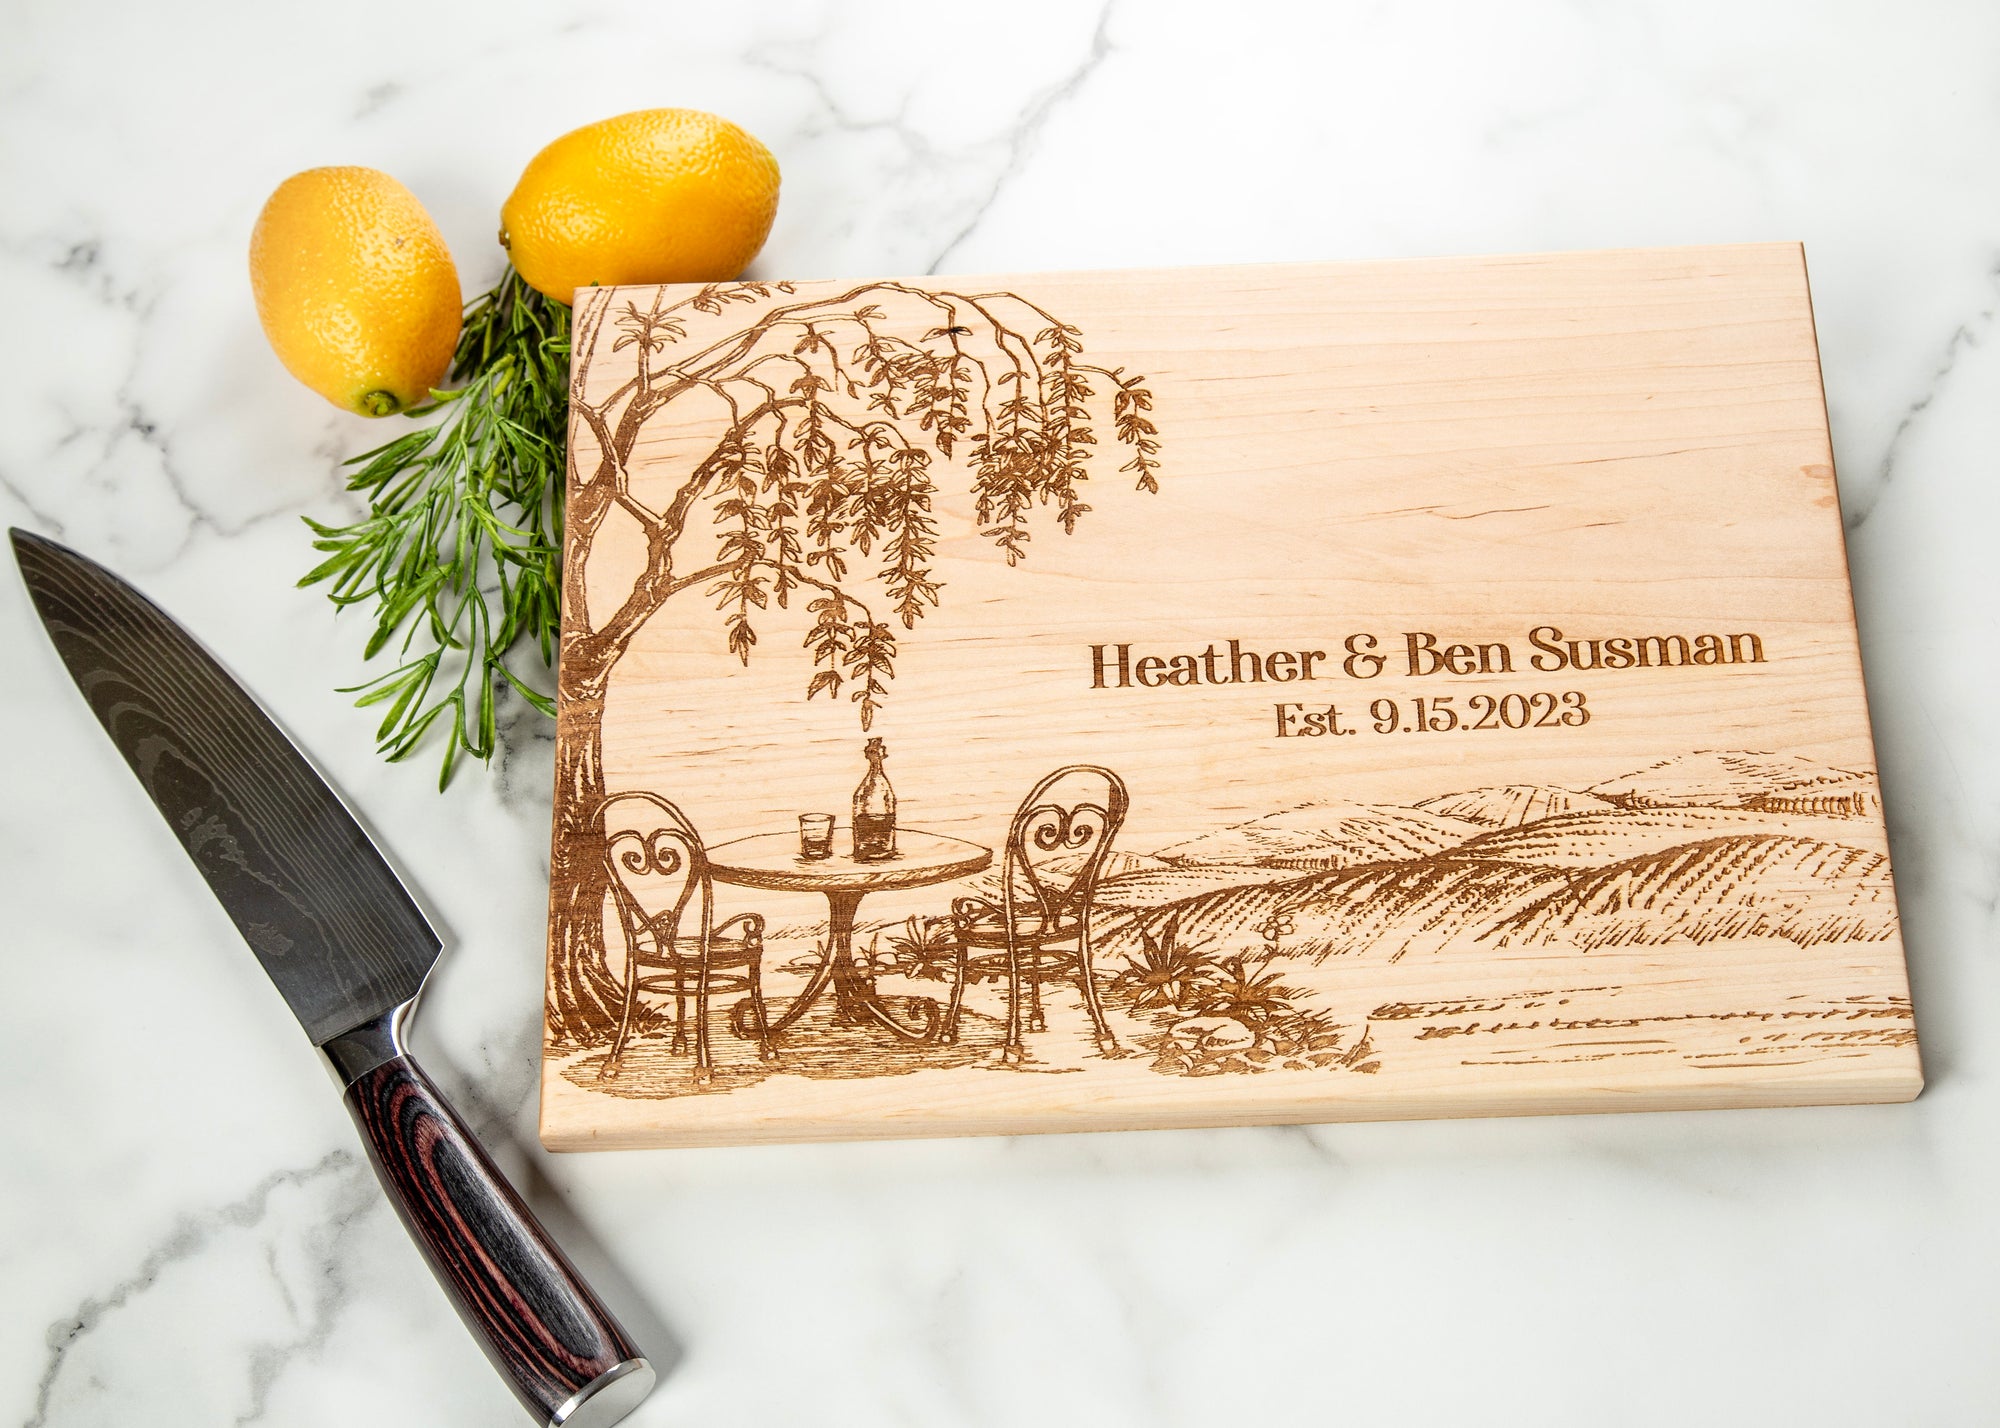 Personalized Cutting Board of a European Countryside Scene, Wedding Anniversary Couples Gift, Housewarming Gift, Husband Gift for Her, Wife Gift